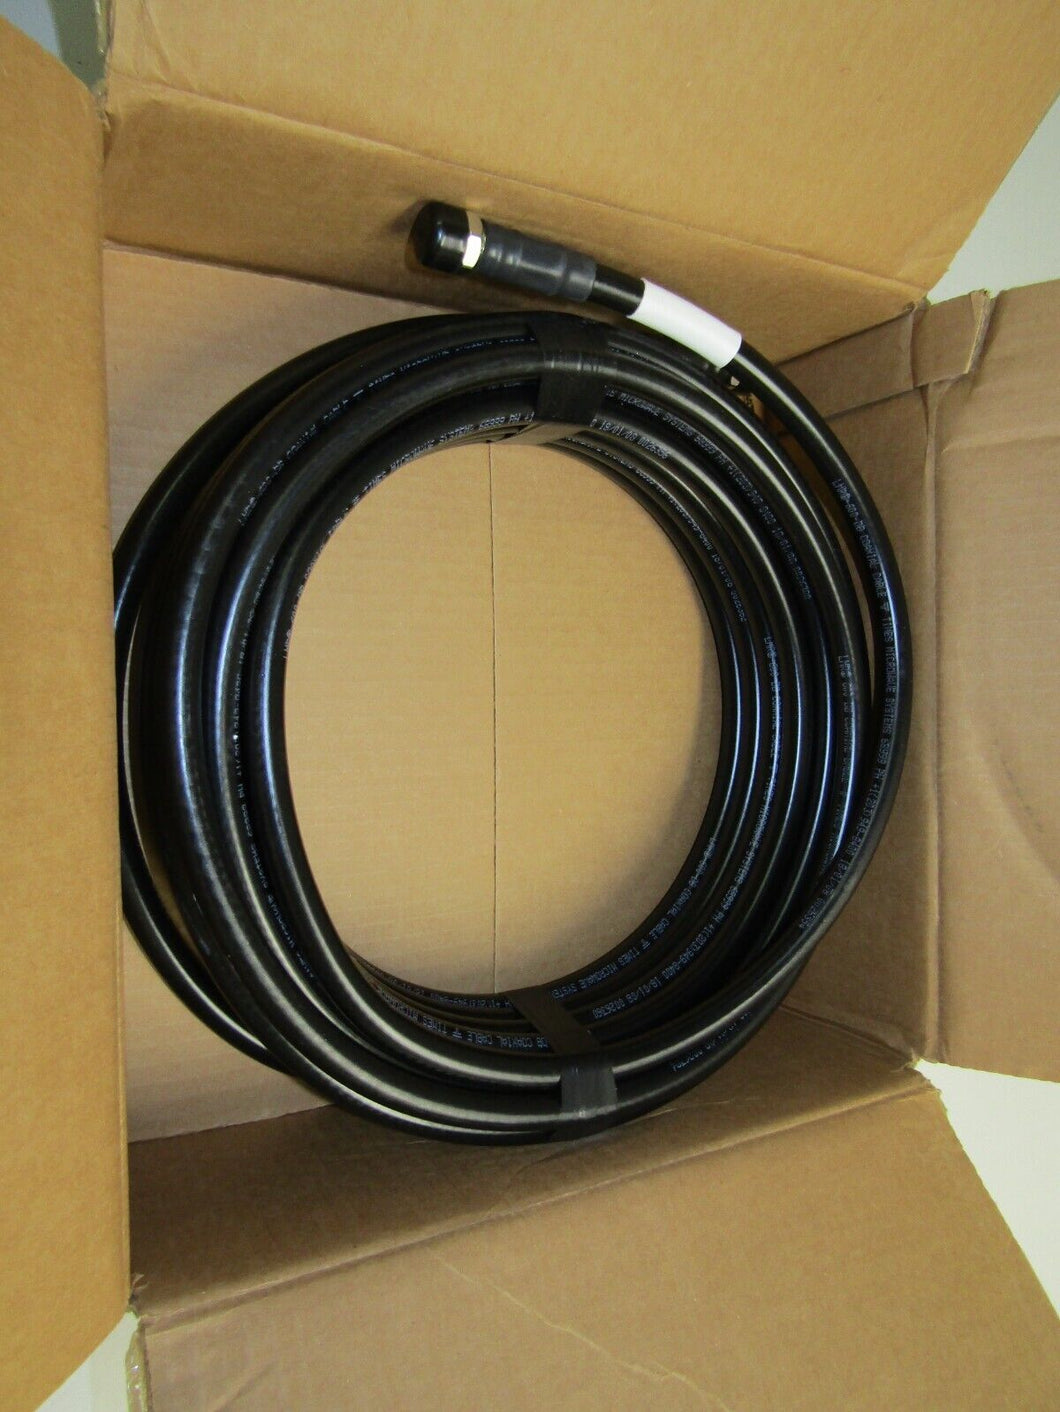 NEW in Box  50 Foot ENTERASYS RBTES-L600-C50F ROAMABOUT ANTENNA CABLE